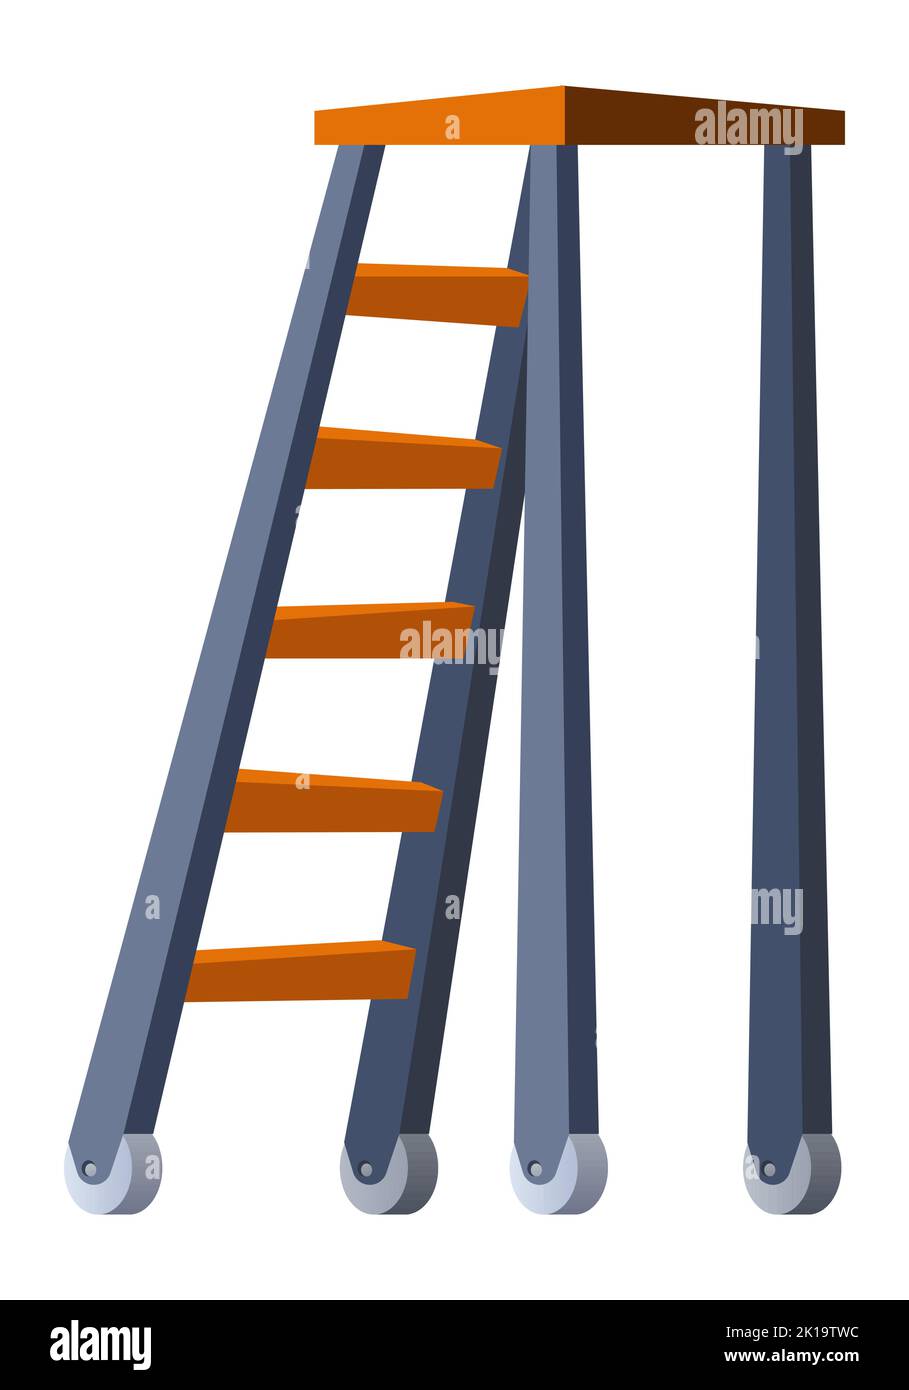 Stepladder on wheels - modern flat design style single isolated image Stock Vector